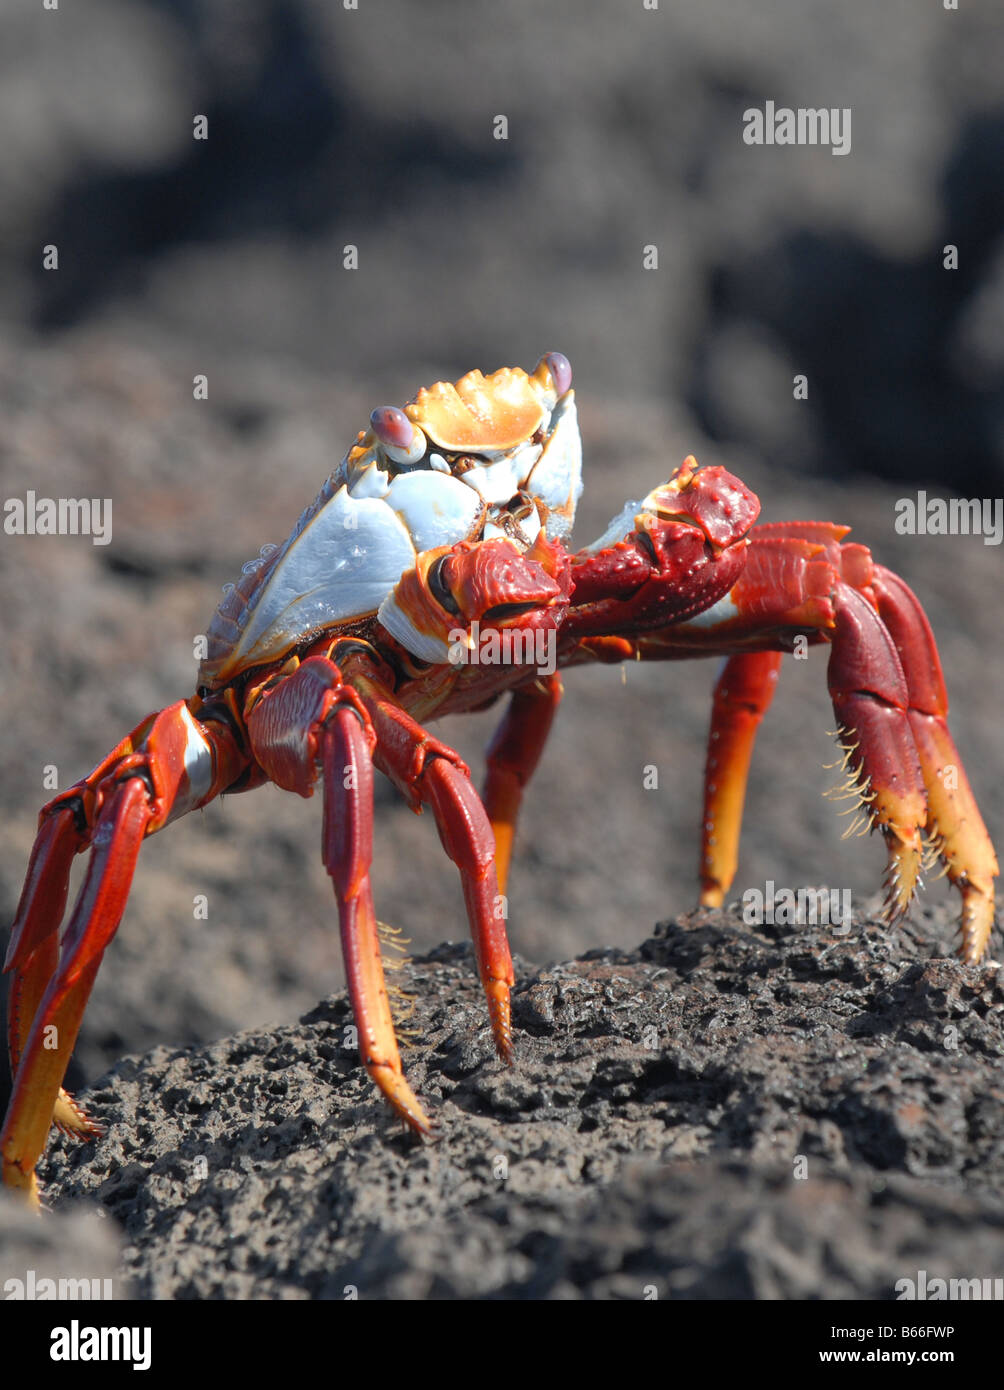 Sally light-crabe pied sur les îles Galapagos Banque D'Images